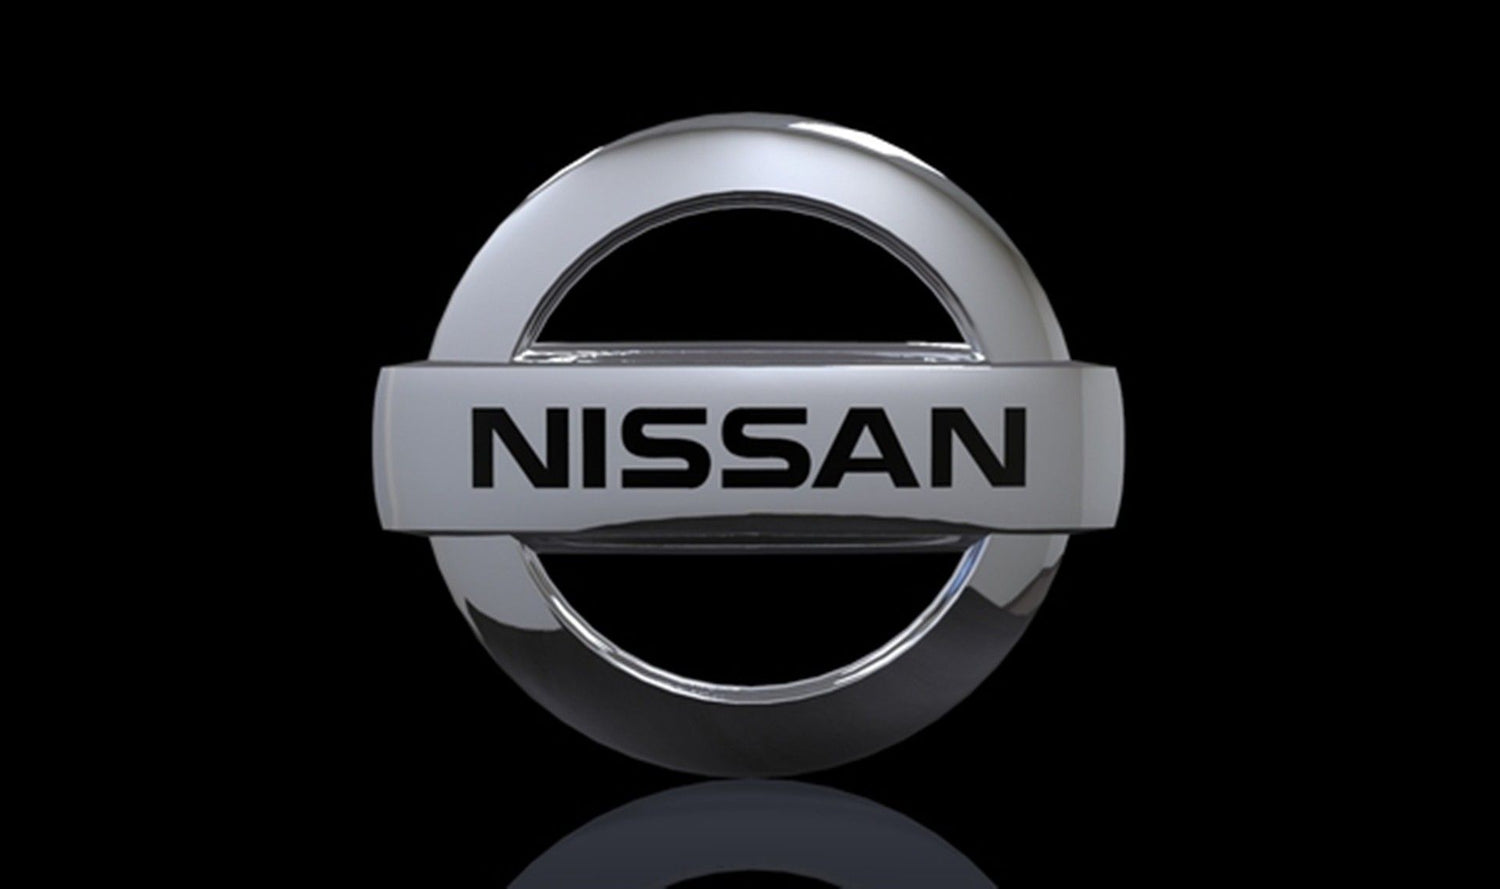 Nissan | Electric Car Charger EV Cables for Nissan type 1, type 2 and Portable Charging Cables